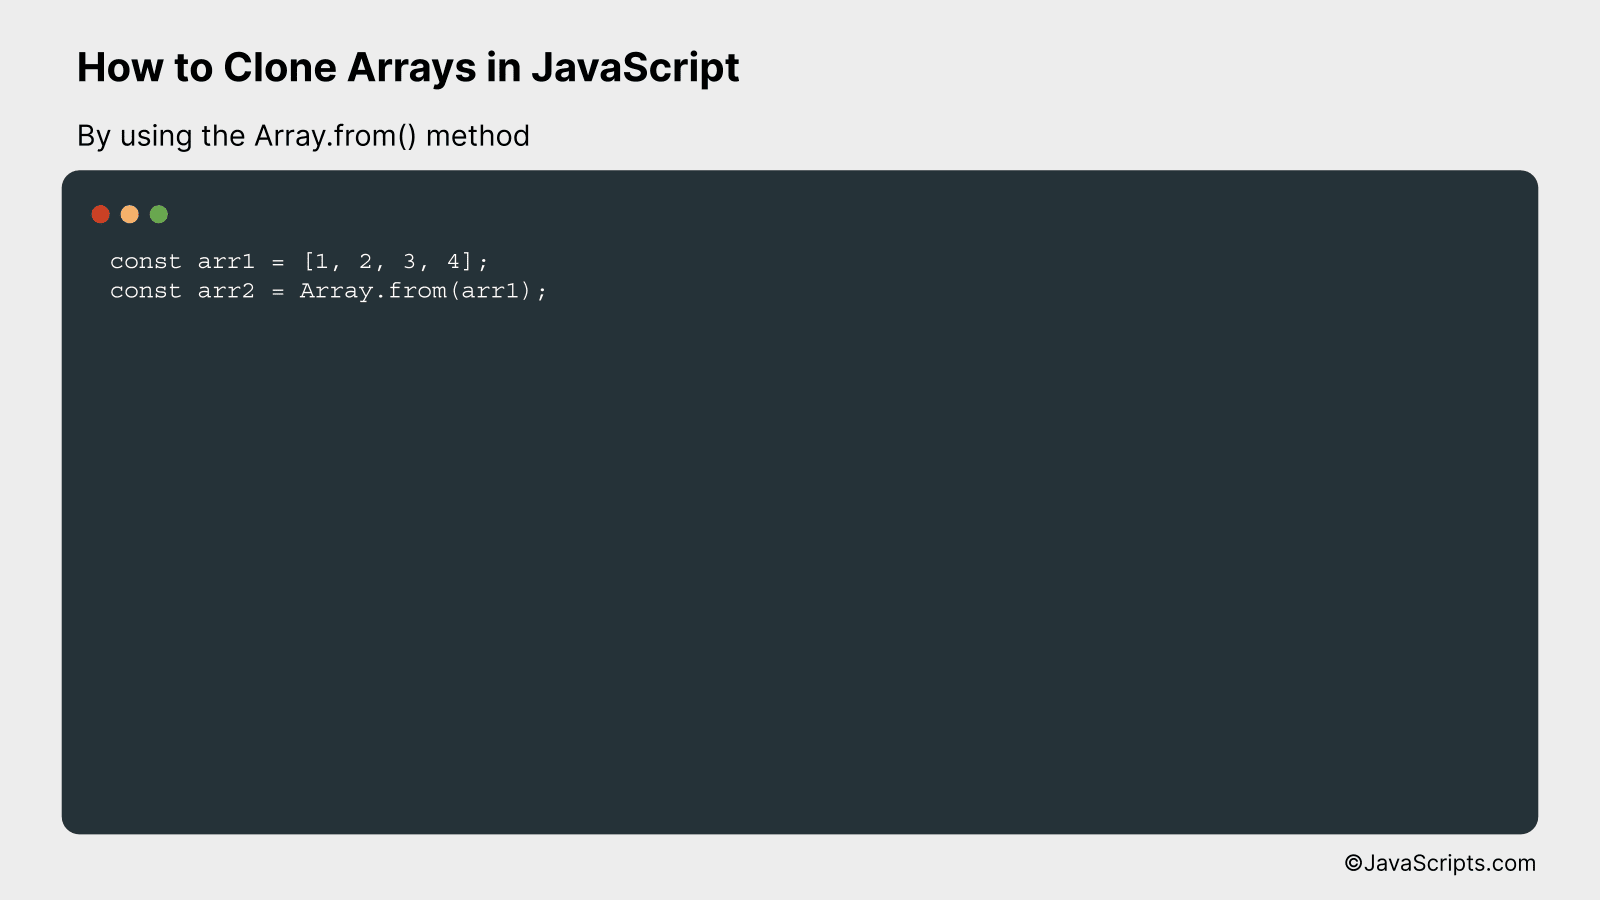 By using the Array.from() method